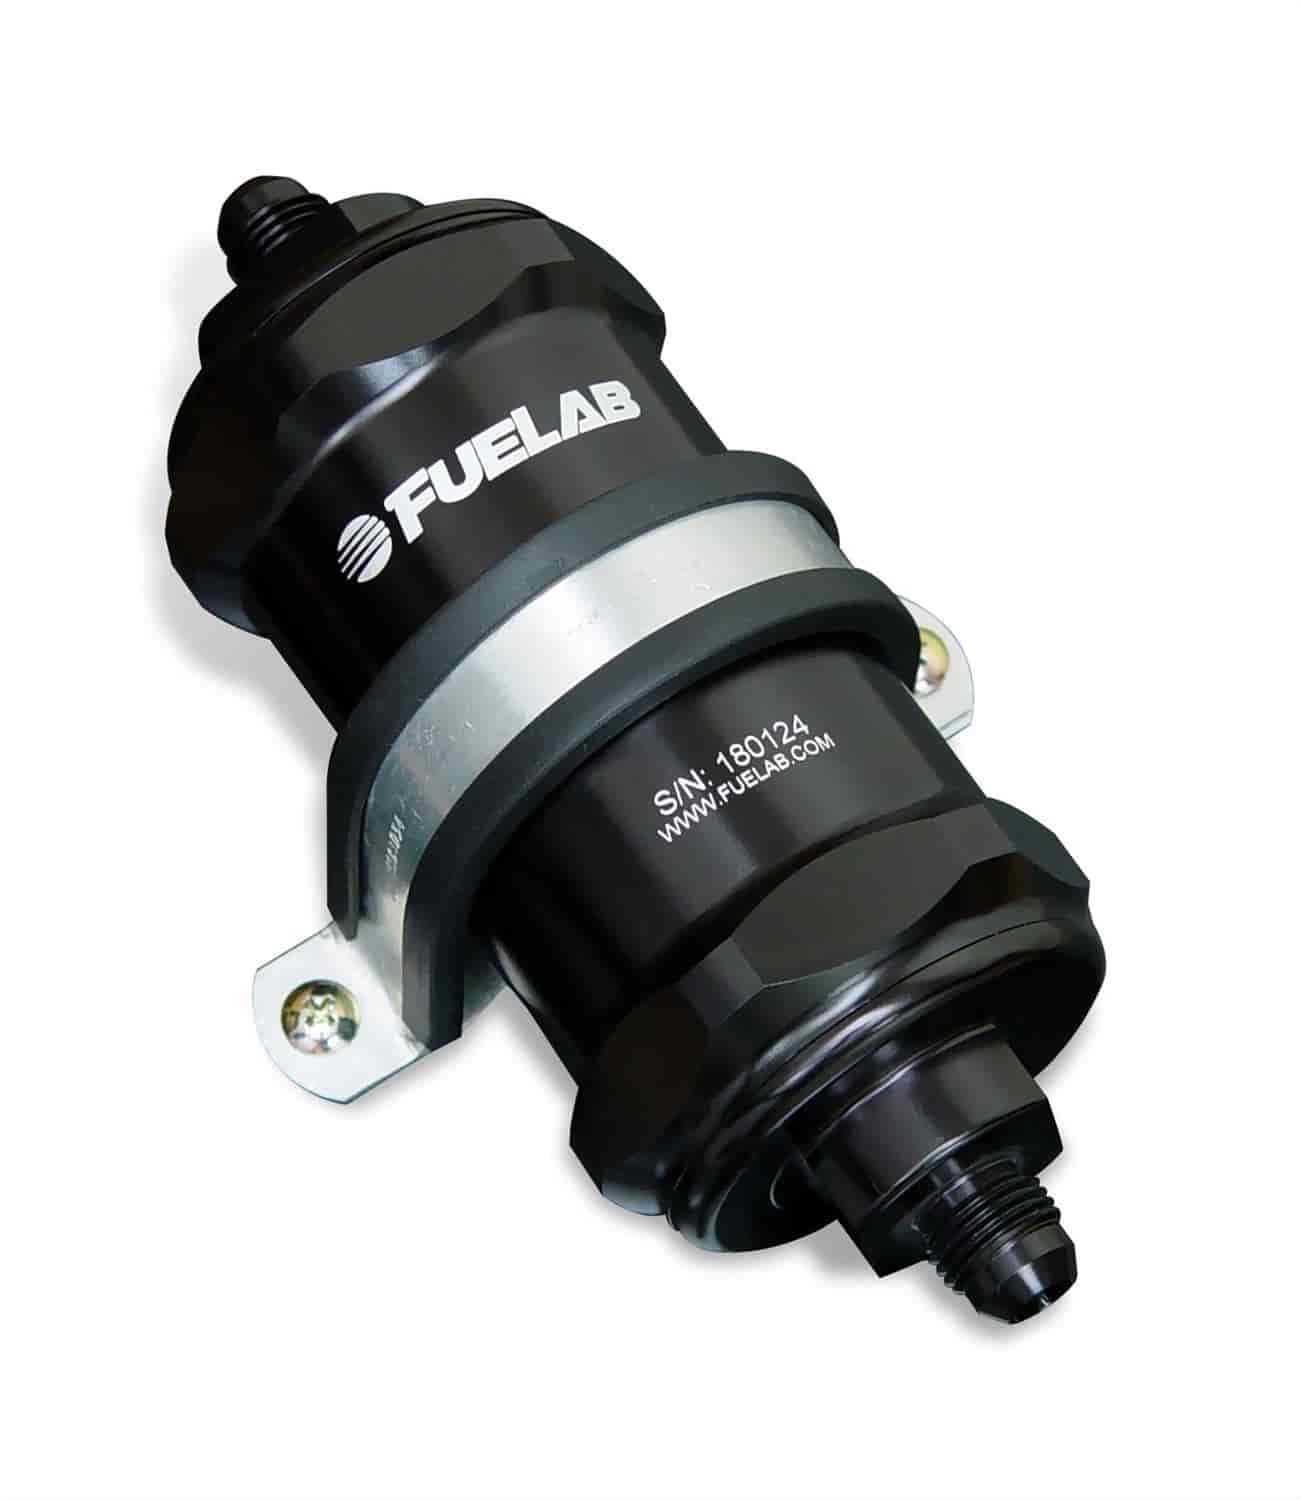 In-Line Fuel Filter Standard Length -12AN Inlet/-8AN Outlet 75 micron stainless steel element